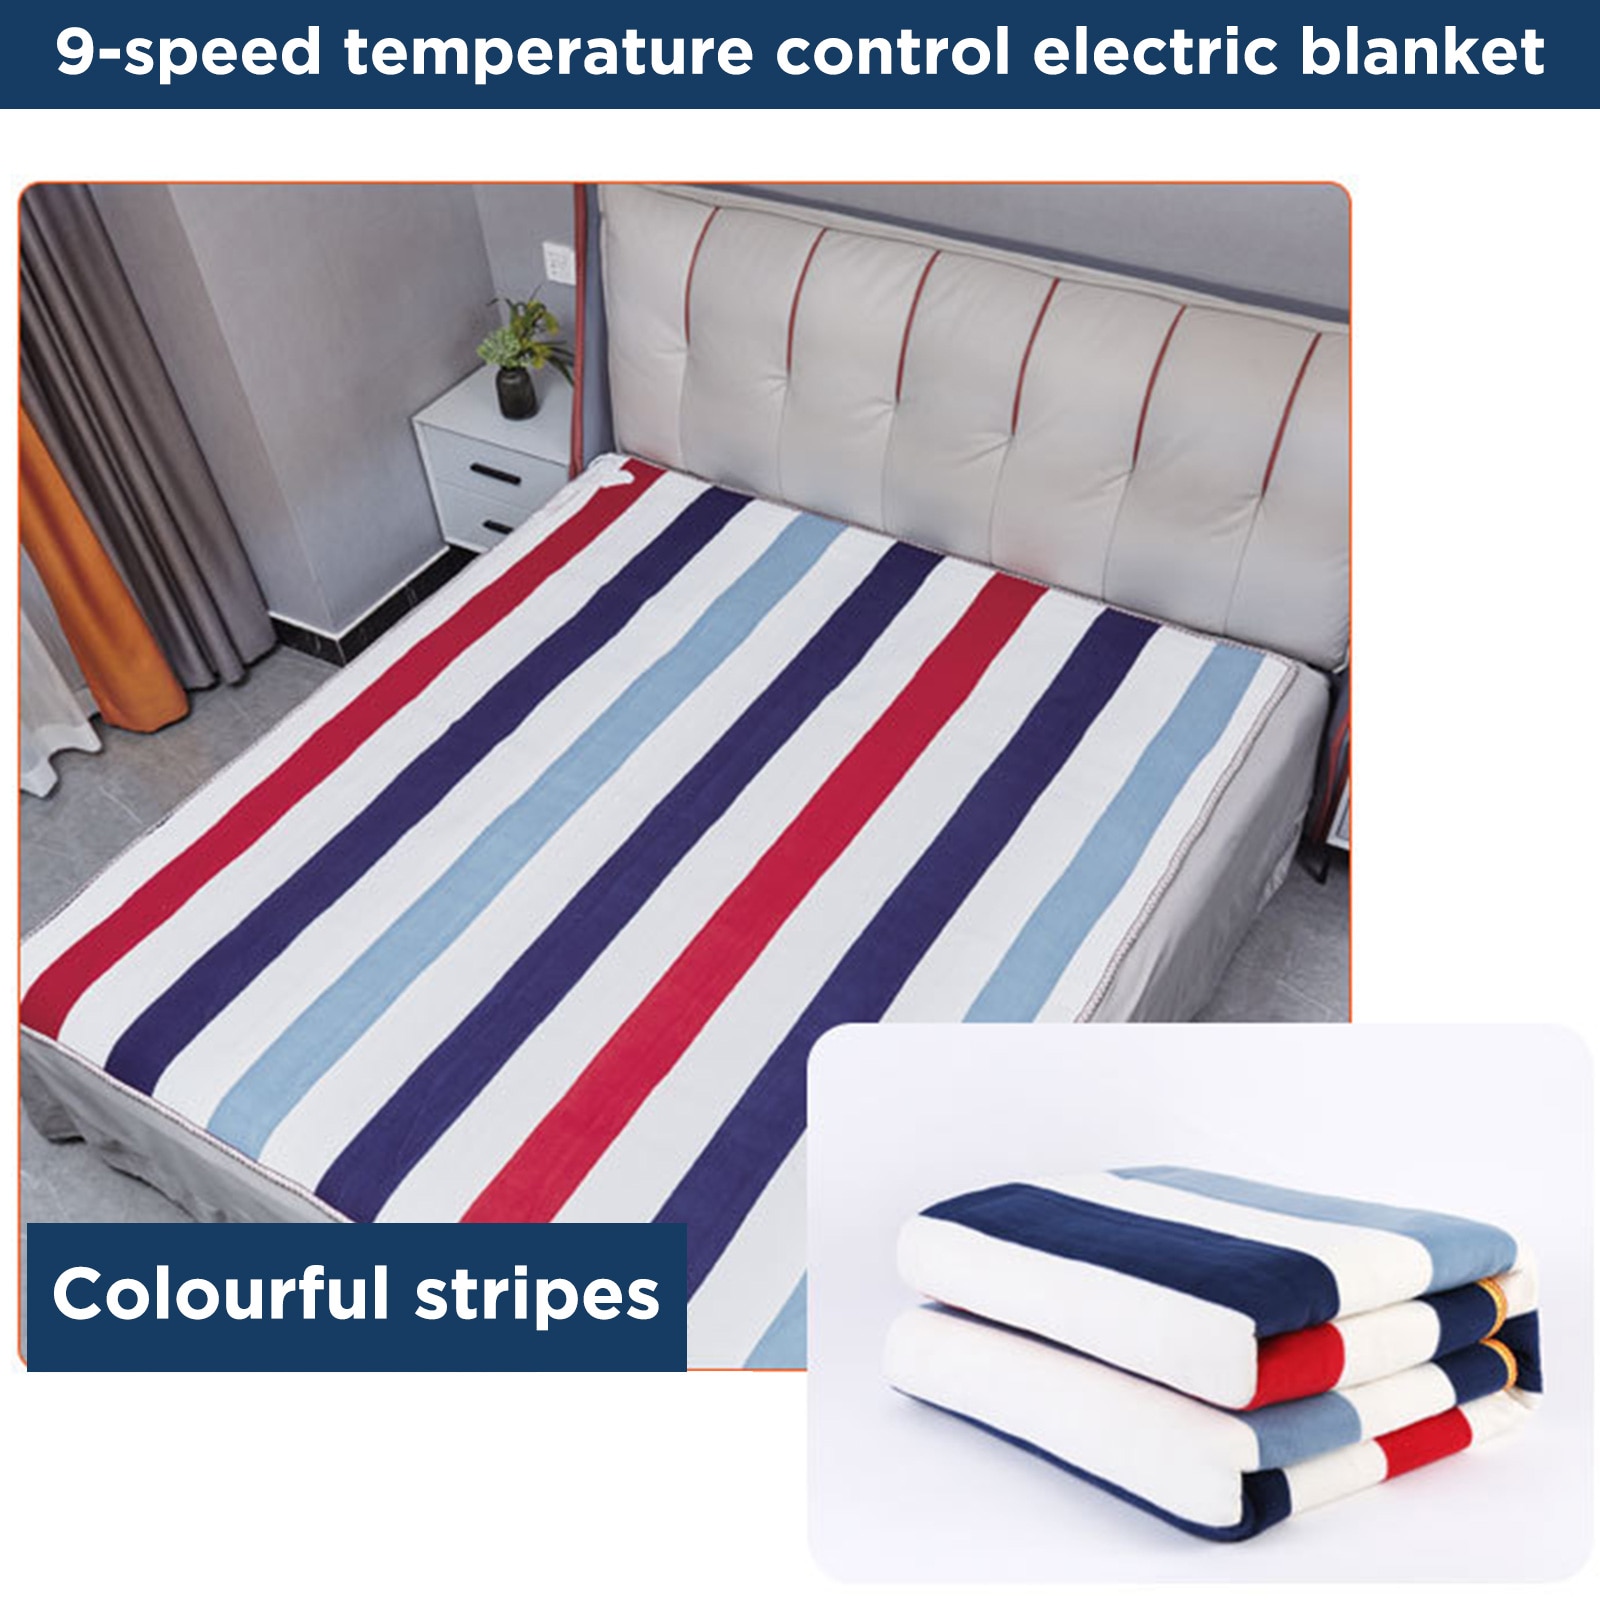 Electric Blanket 220v 110v Thicker Heater Heated Blanket Mattress Thermostat Electric Heating Blanket Winter Body Warmer